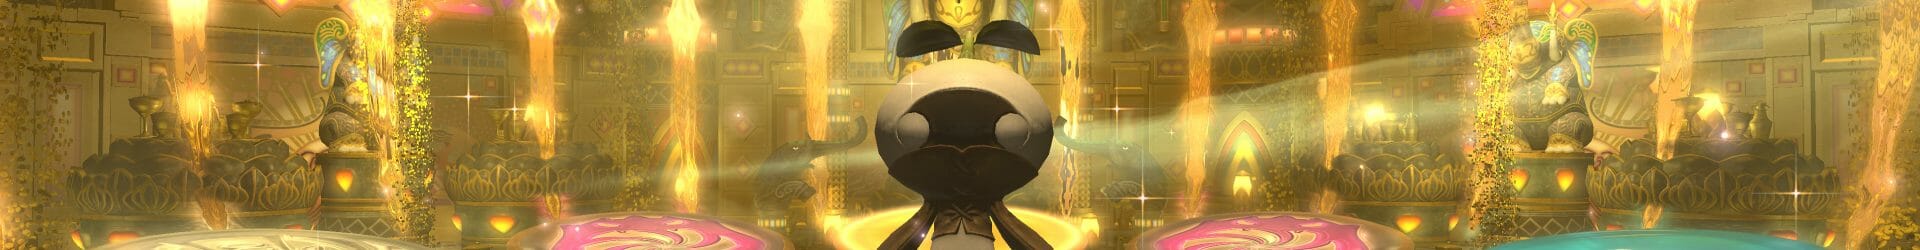 cropped-ffxiv_20191102_180133_250-2.png